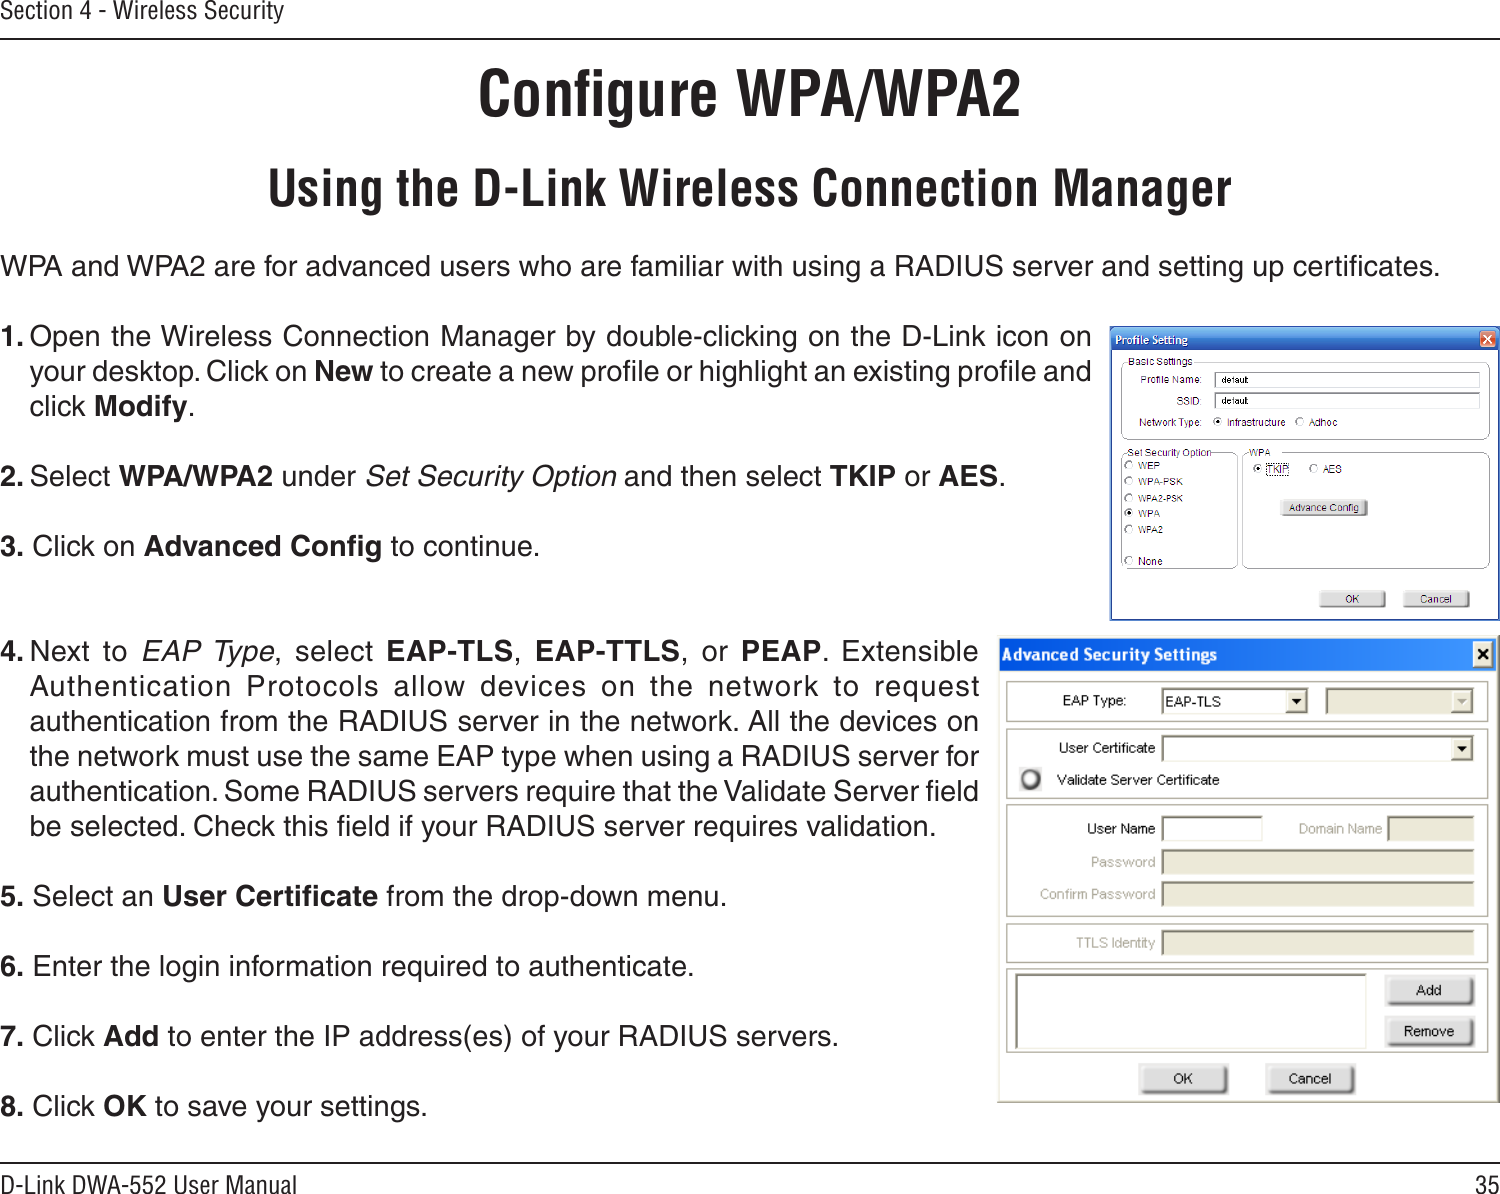 35D-Link DWA-552 User ManualSection 4 - Wireless SecurityConﬁgure WPA/WPA2Using the D-Link Wireless Connection ManagerWPA and WPA2 are for advanced users who are familiar with using a RADIUS server and setting up certiﬁcates.1. Open the Wireless Connection Manager by double-clicking on the D-Link icon on your desktop. Click on New to create a new proﬁle or highlight an existing proﬁle and click Modify. 2. Select WPA/WPA2 under Set Security Option and then select TKIP or AES.3. Click on Advanced Conﬁg to continue.4. Next  to  EAP Type,  select  EAP-TLS,  EAP-TTLS,  or  PEAP.  Extensible Authentication  Protocols  allow  devices  on  the  network  to  request authentication from the RADIUS server in the network. All the devices on the network must use the same EAP type when using a RADIUS server for authentication. Some RADIUS servers require that the Validate Server ﬁeld be selected. Check this ﬁeld if your RADIUS server requires validation.5. Select an User Certiﬁcate from the drop-down menu.6. Enter the login information required to authenticate.7. Click Add to enter the IP address(es) of your RADIUS servers.8. Click OK to save your settings.